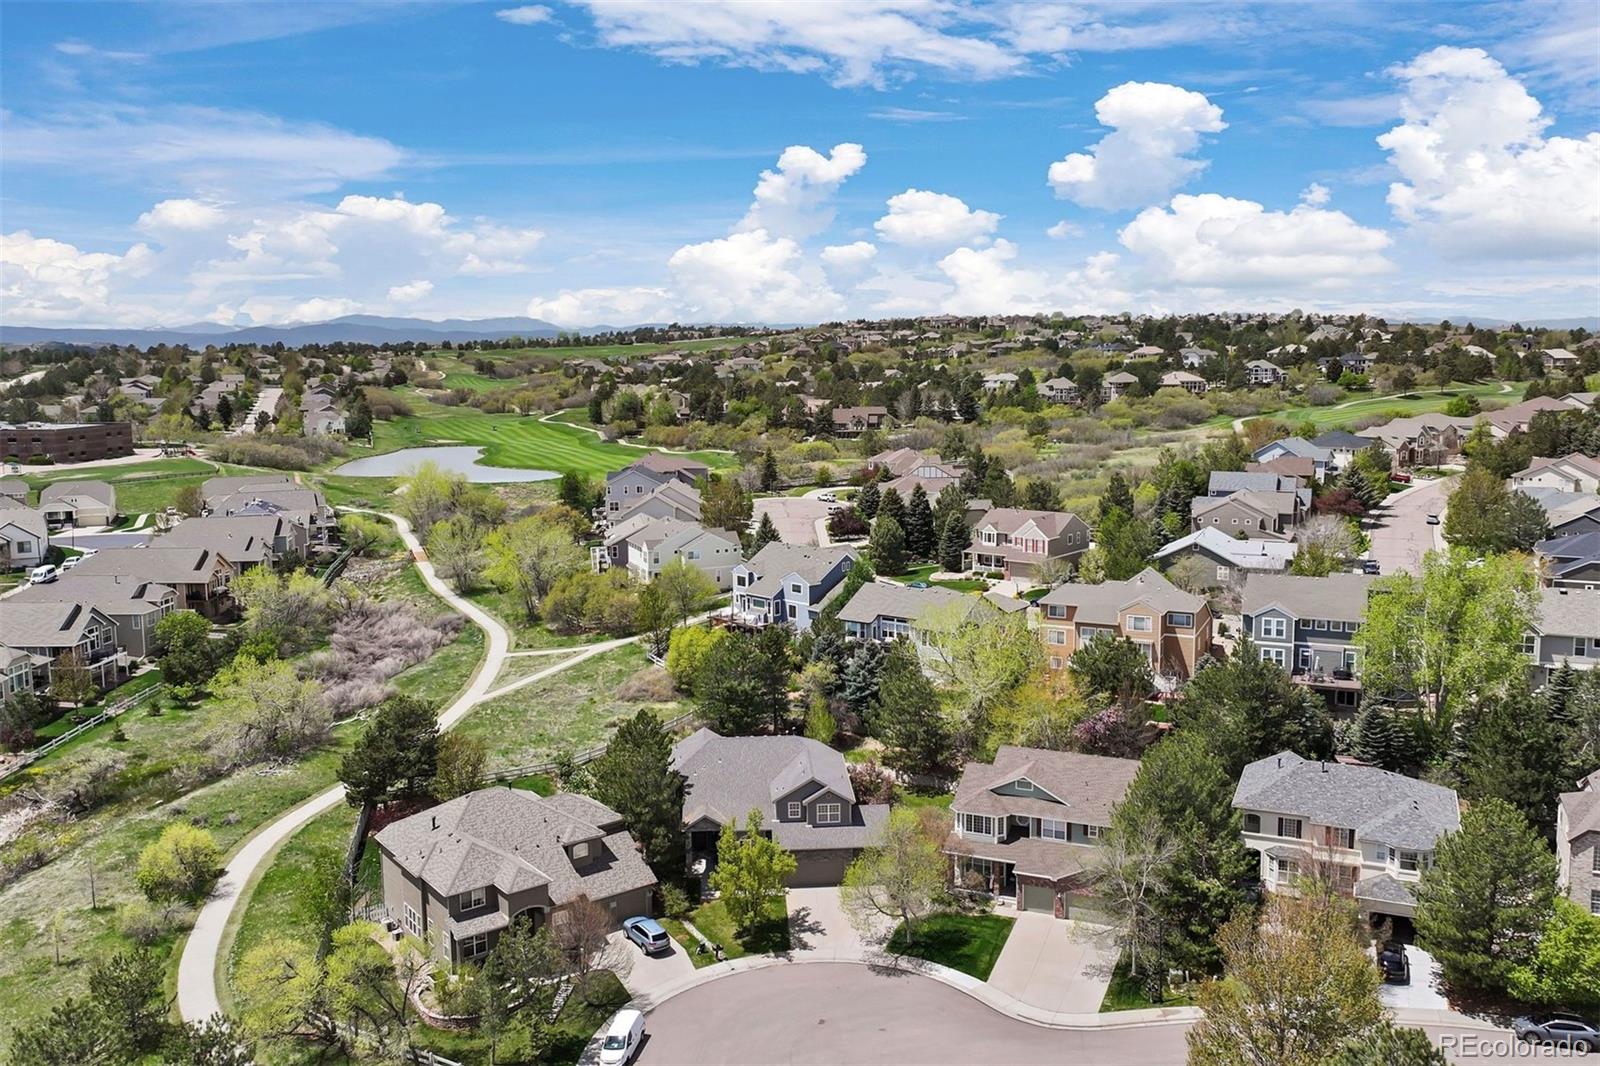 Report Image for 508  Stonemont Drive,Castle Pines, Colorado